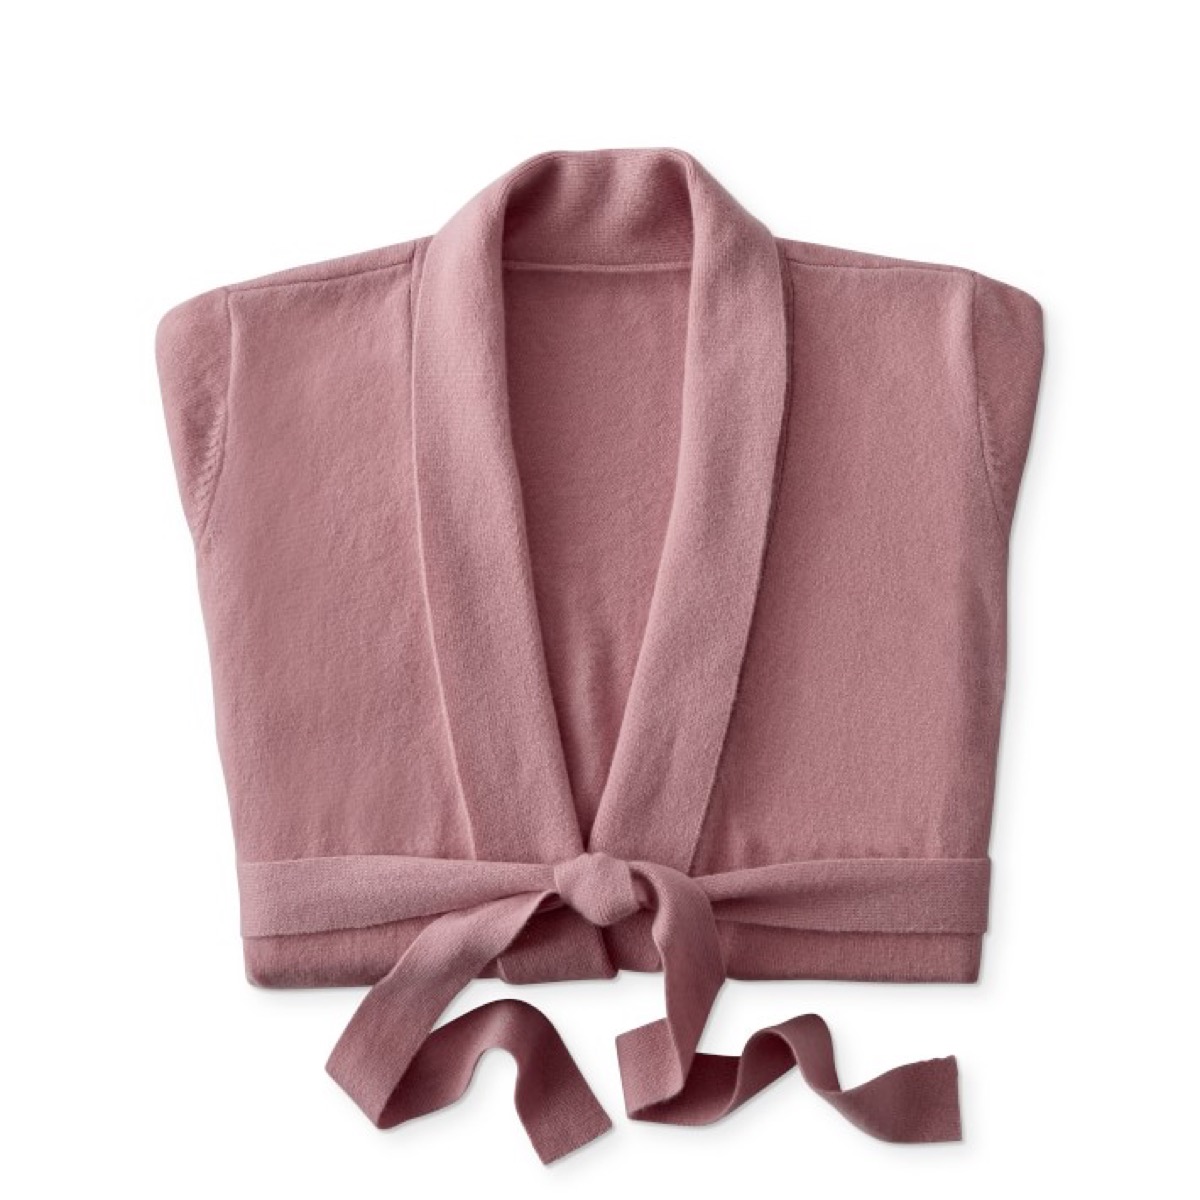 Folded cashmere robe in blush